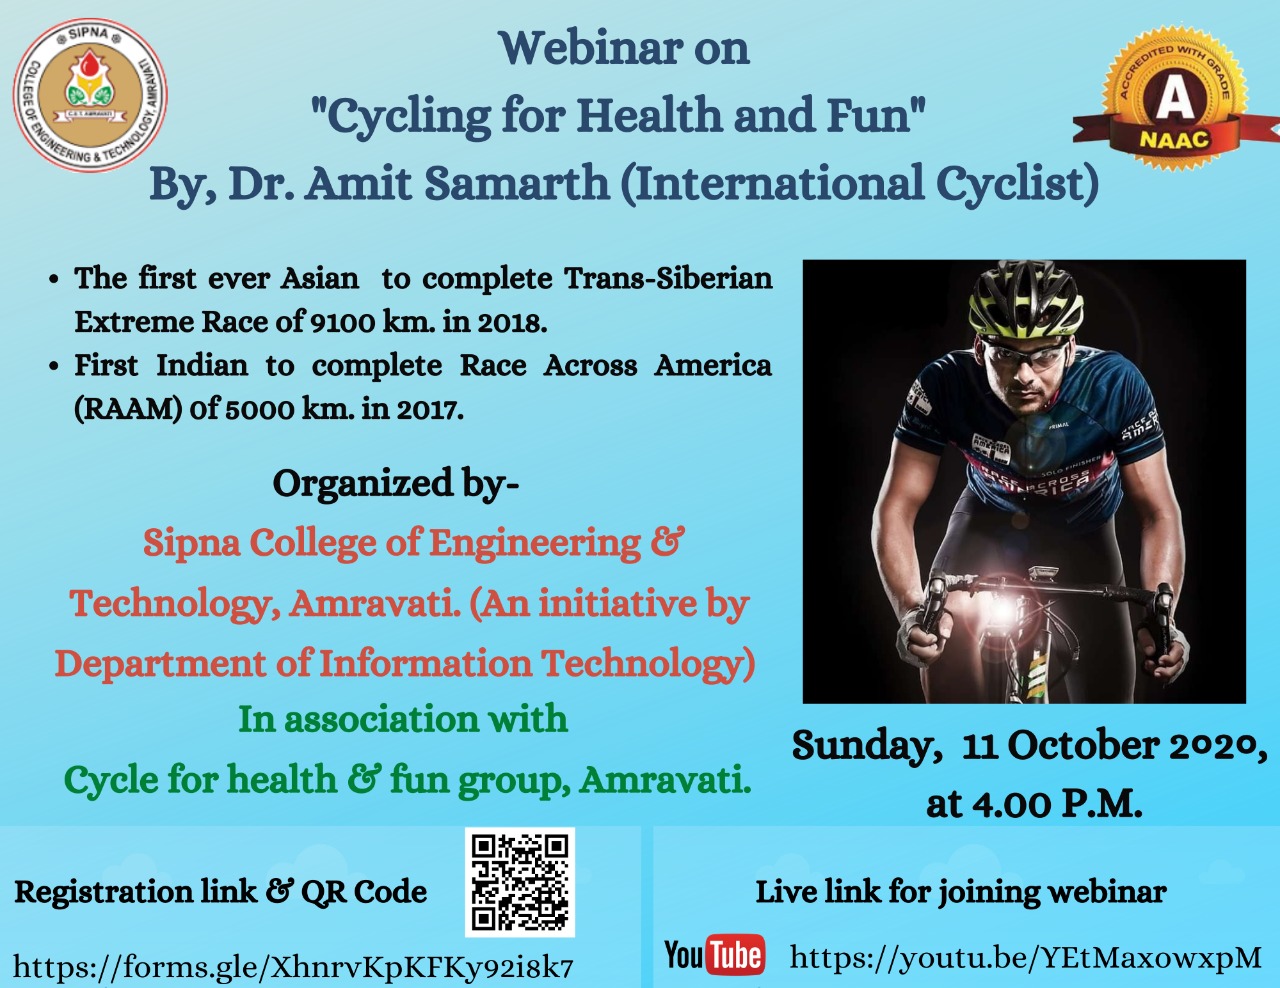 Department of Information Technology, Sipna COET, Amravati in association with Cycle For Health & Fun Group, Amravati